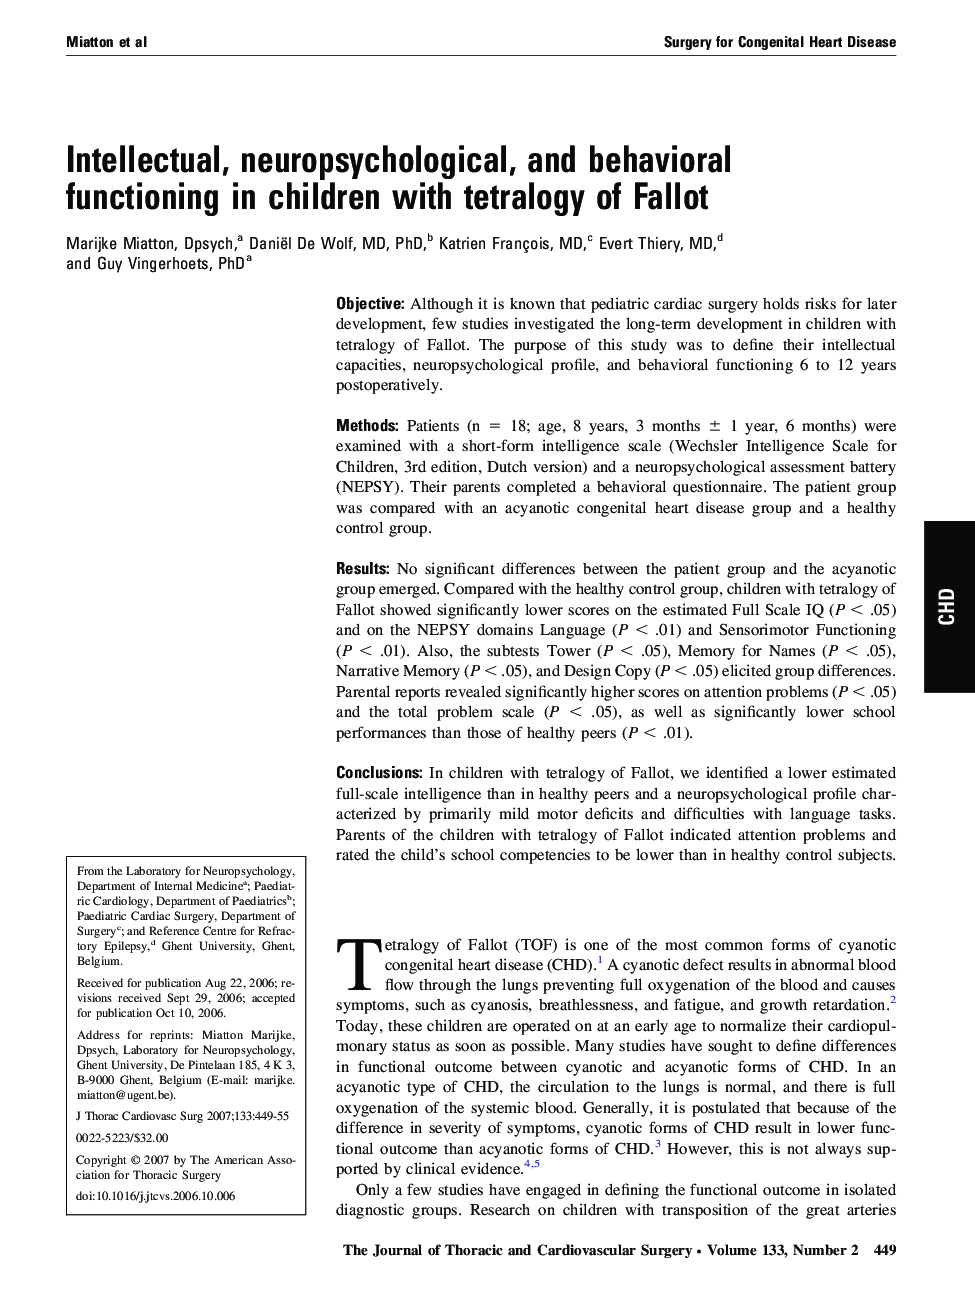 Intellectual, neuropsychological, and behavioral functioning in children with tetralogy of Fallot